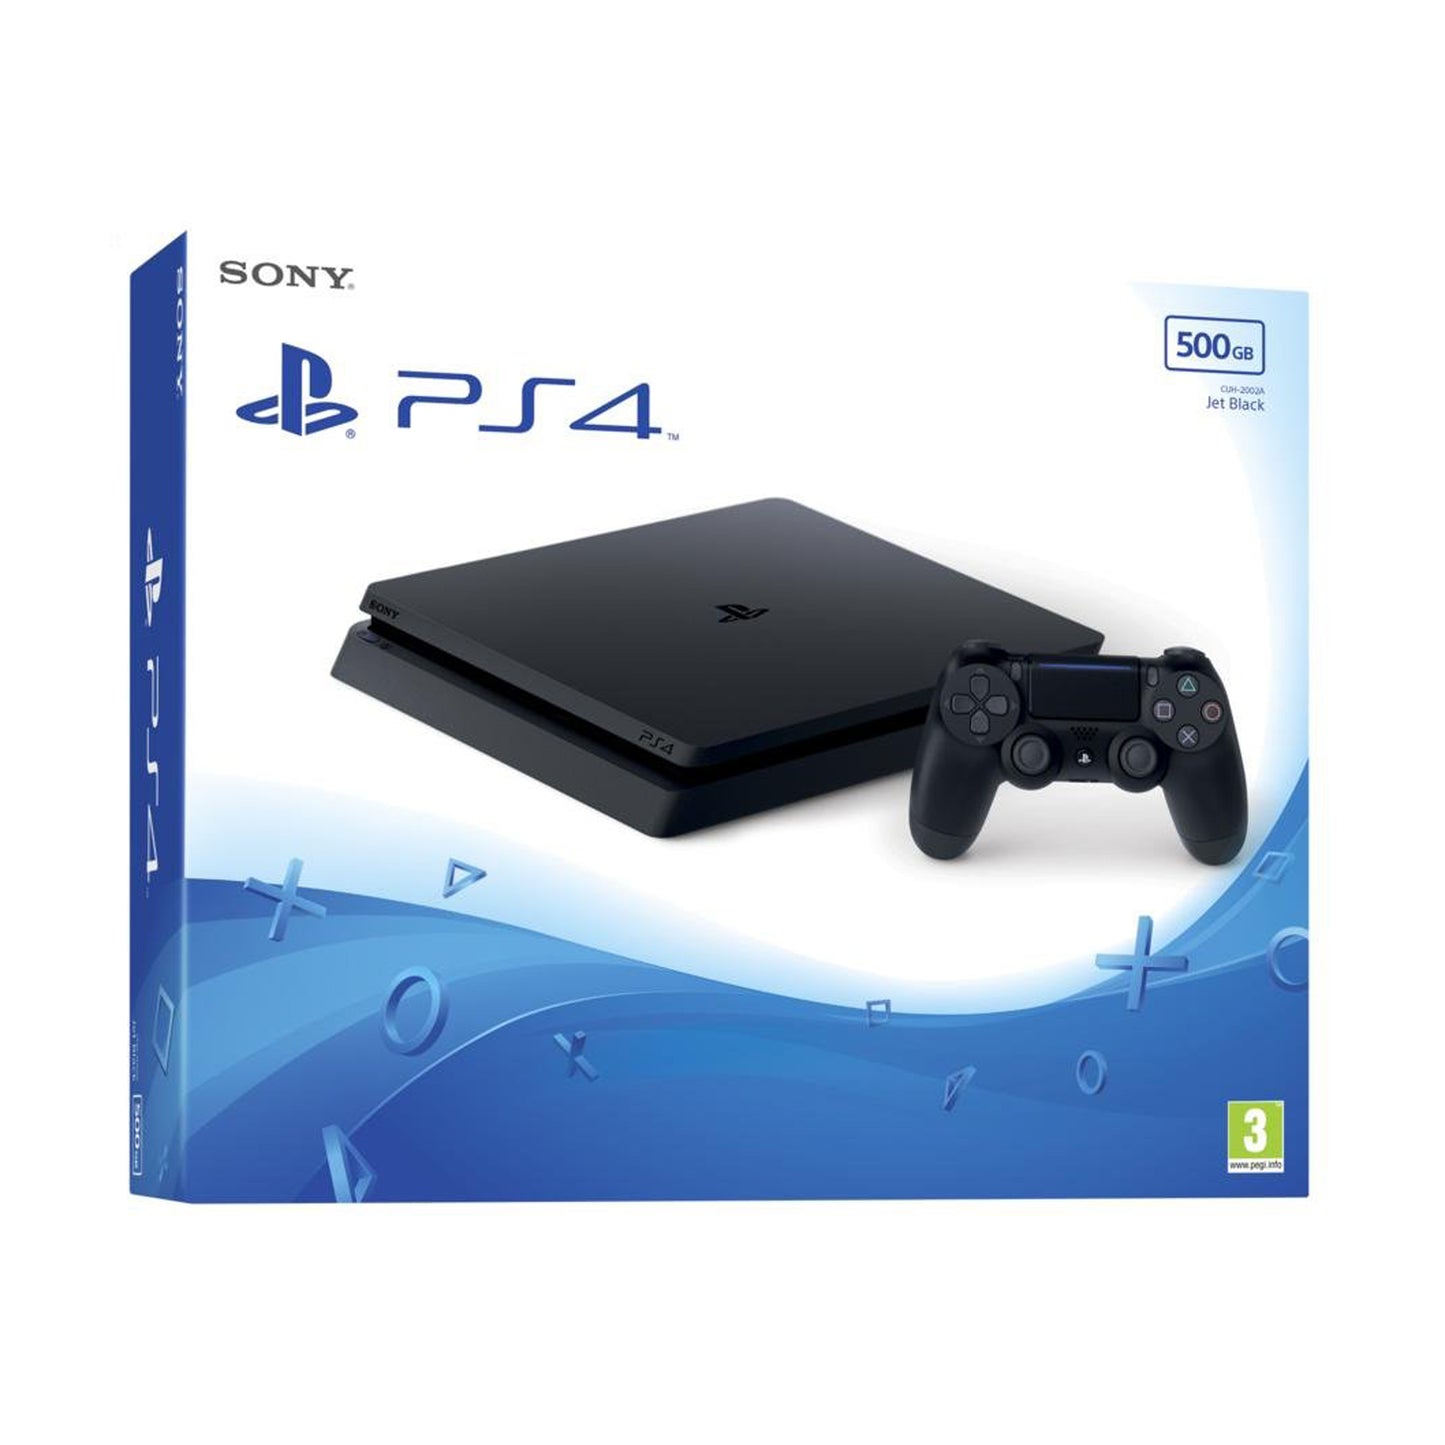 Sony Playstation 4 - 500 GB - Slim Version, PS4 (CUH-2000A B01) with 2 Controller